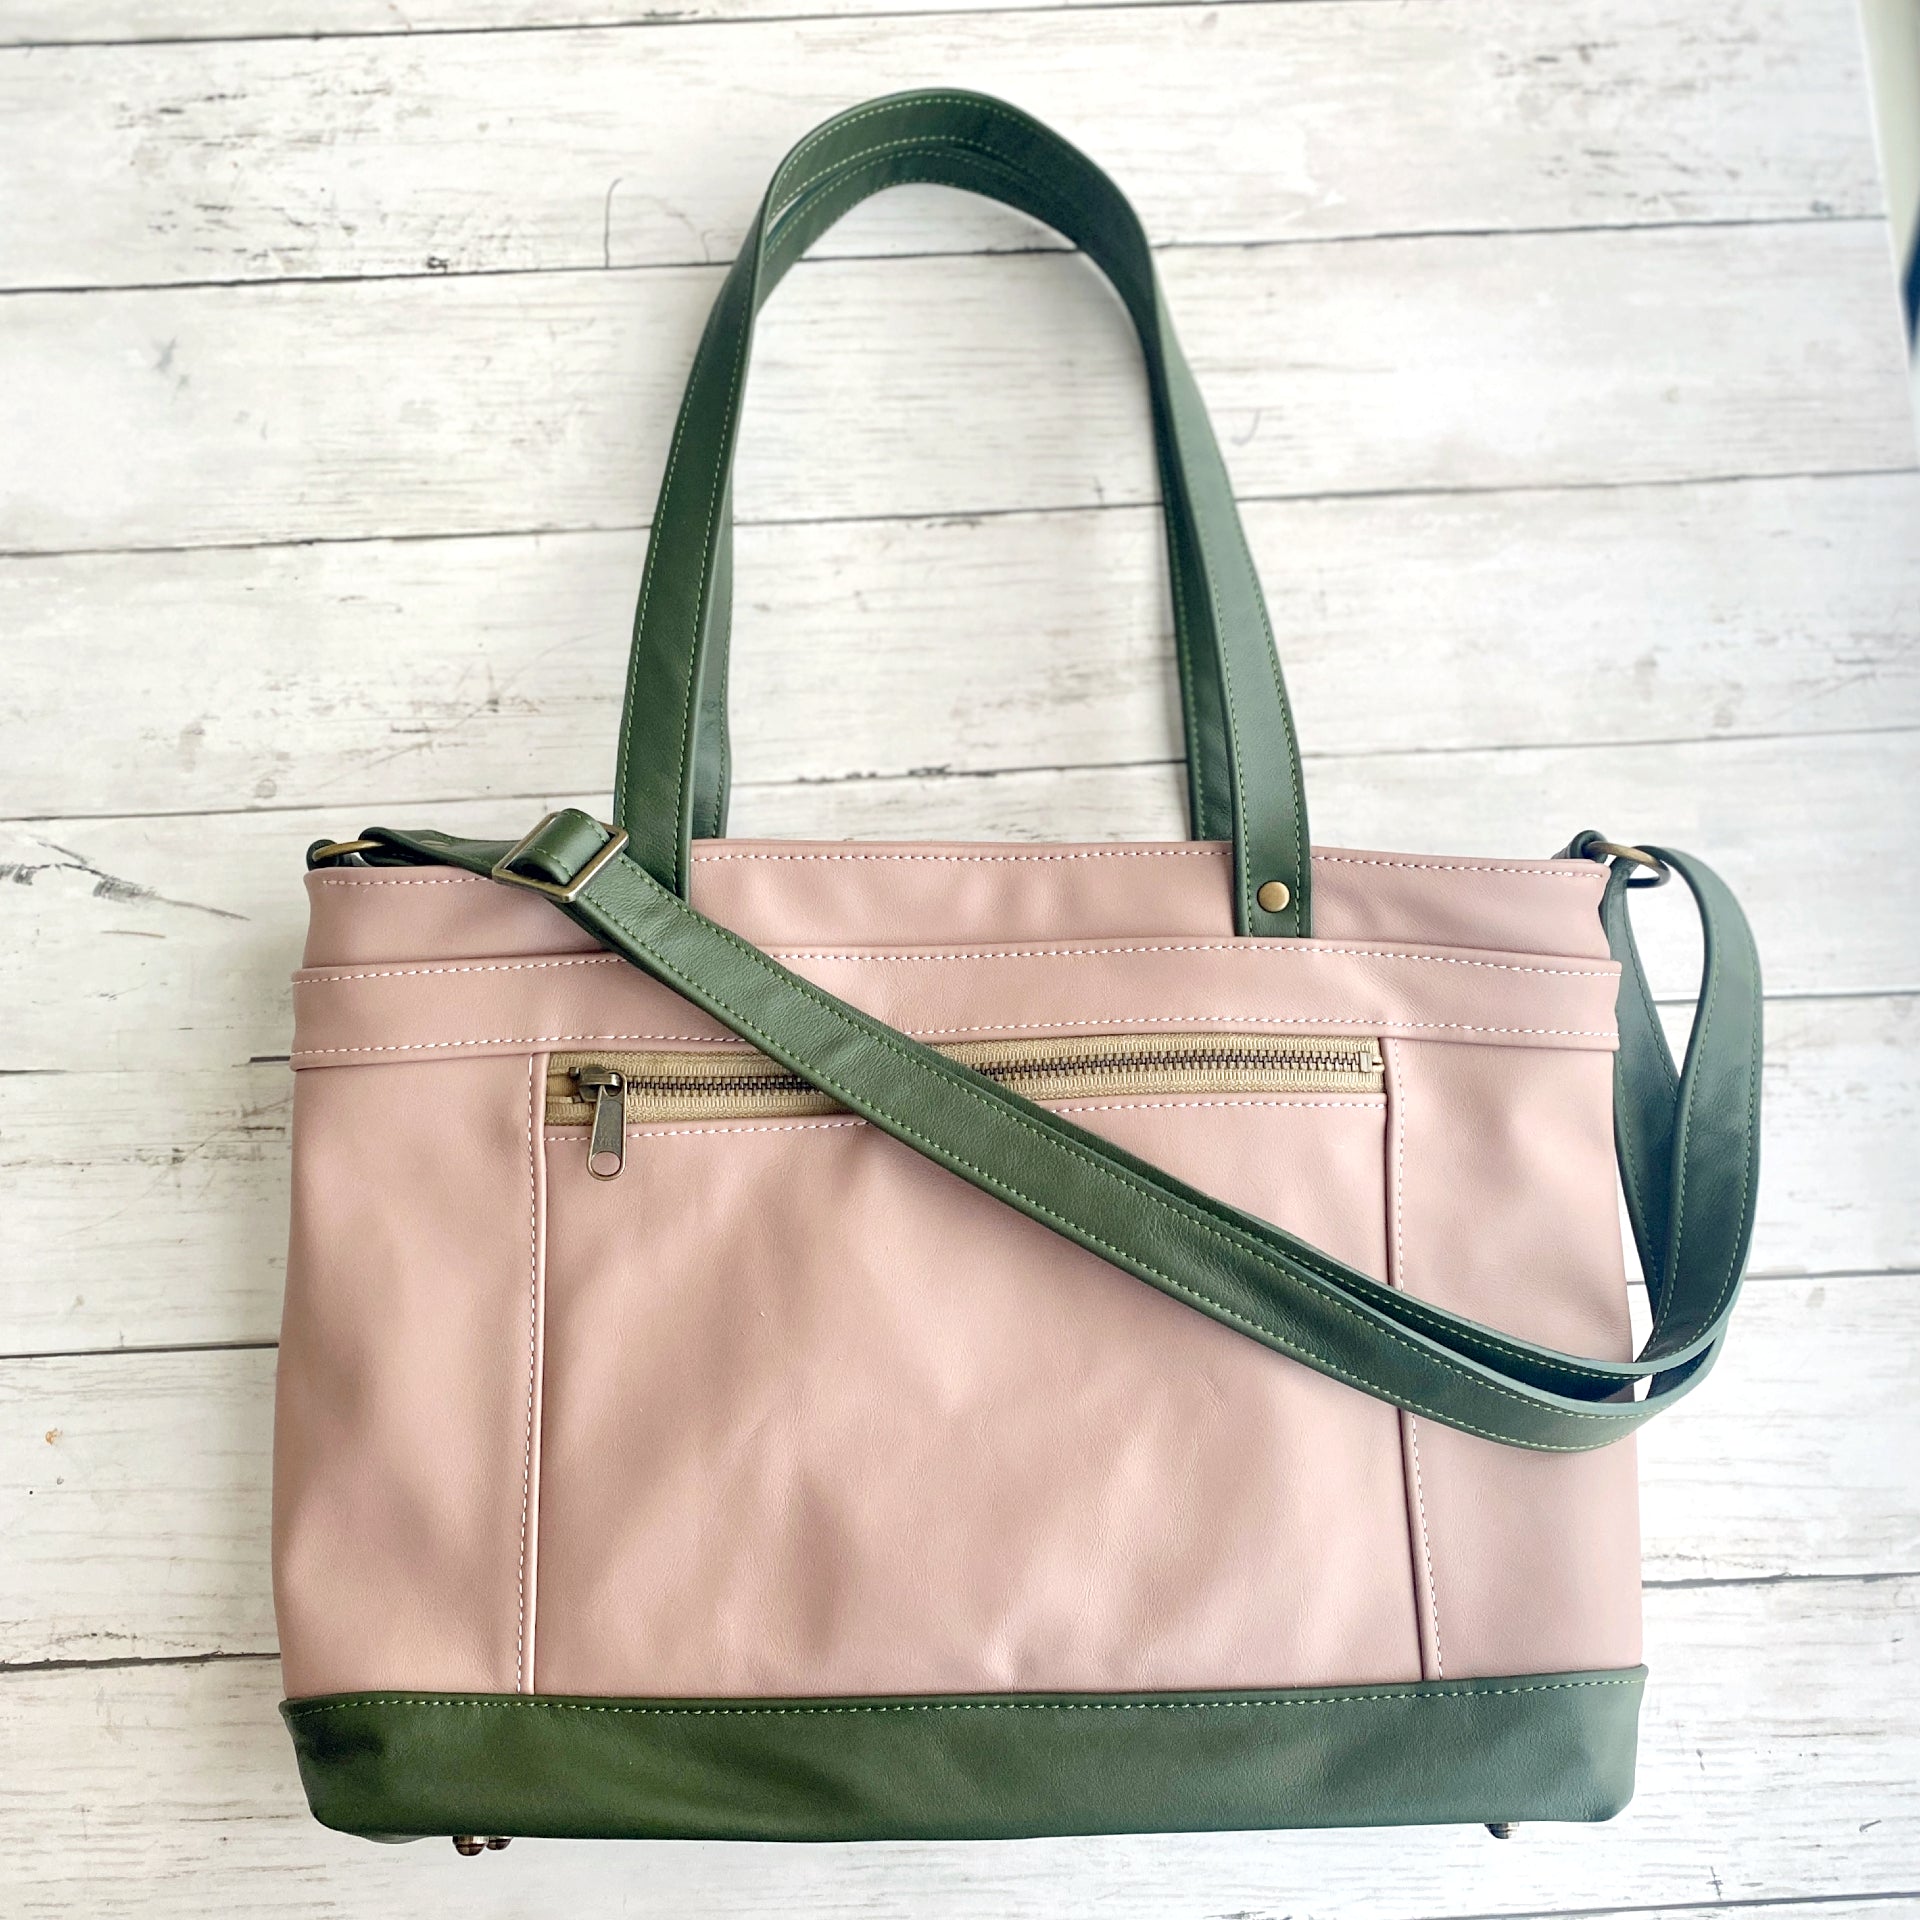 Archive Mini in Dusty Rose, Olive, RTS